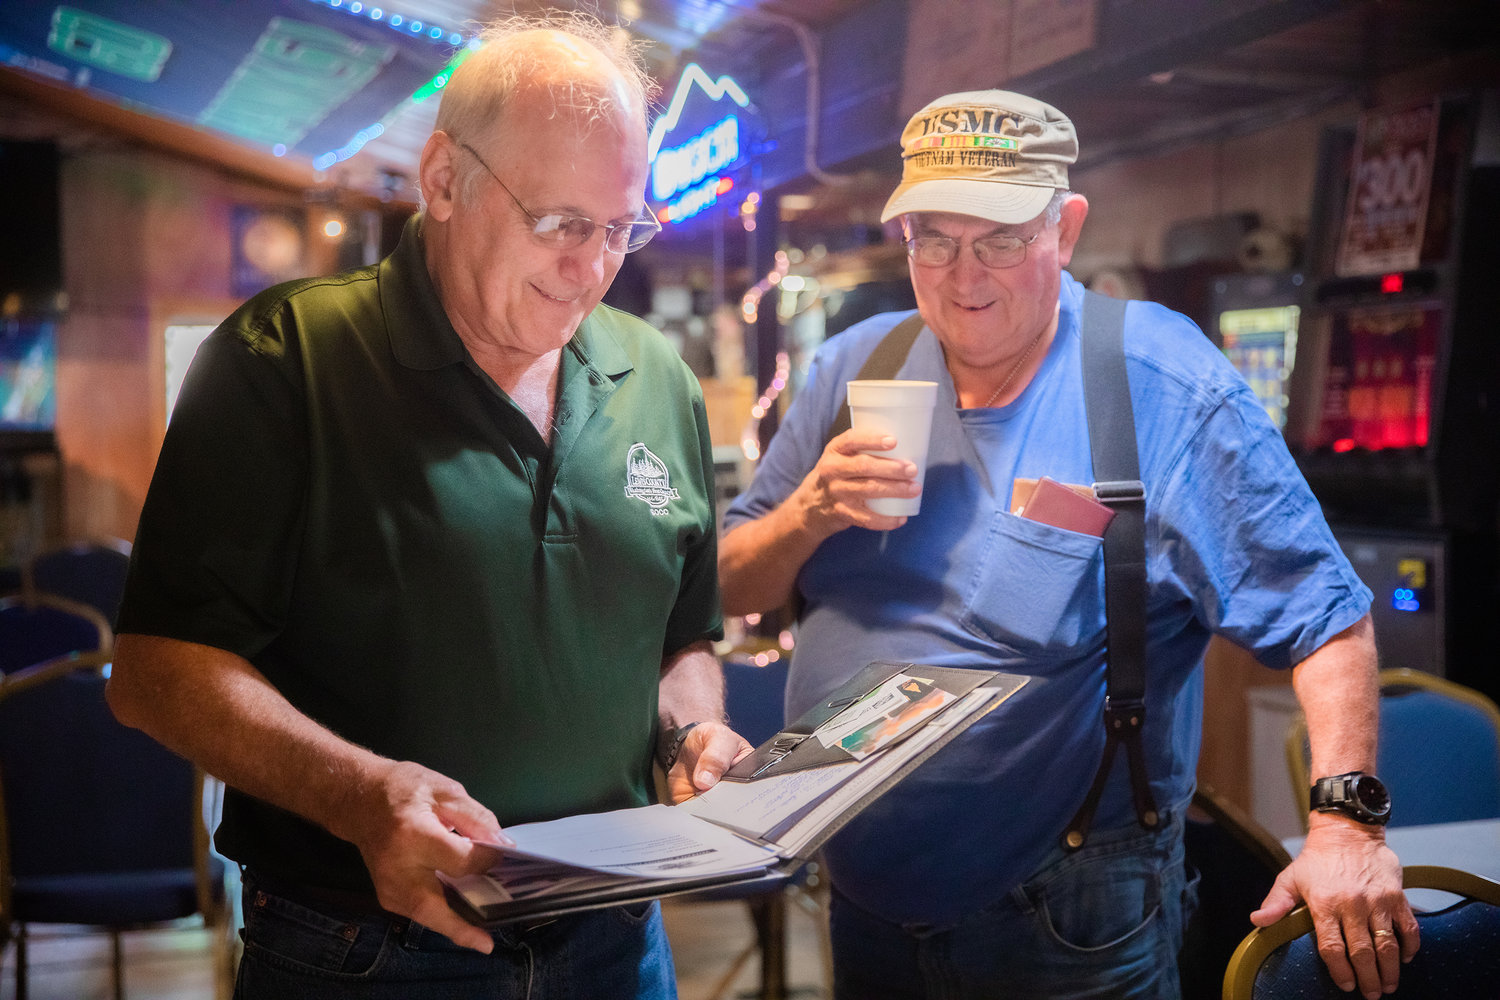 Commissioner Lee Grose laughs and talks with George Schaefer, a U.S. Marine Corps veteran, Thursday in Randle at the Tall Timber Restaurant.